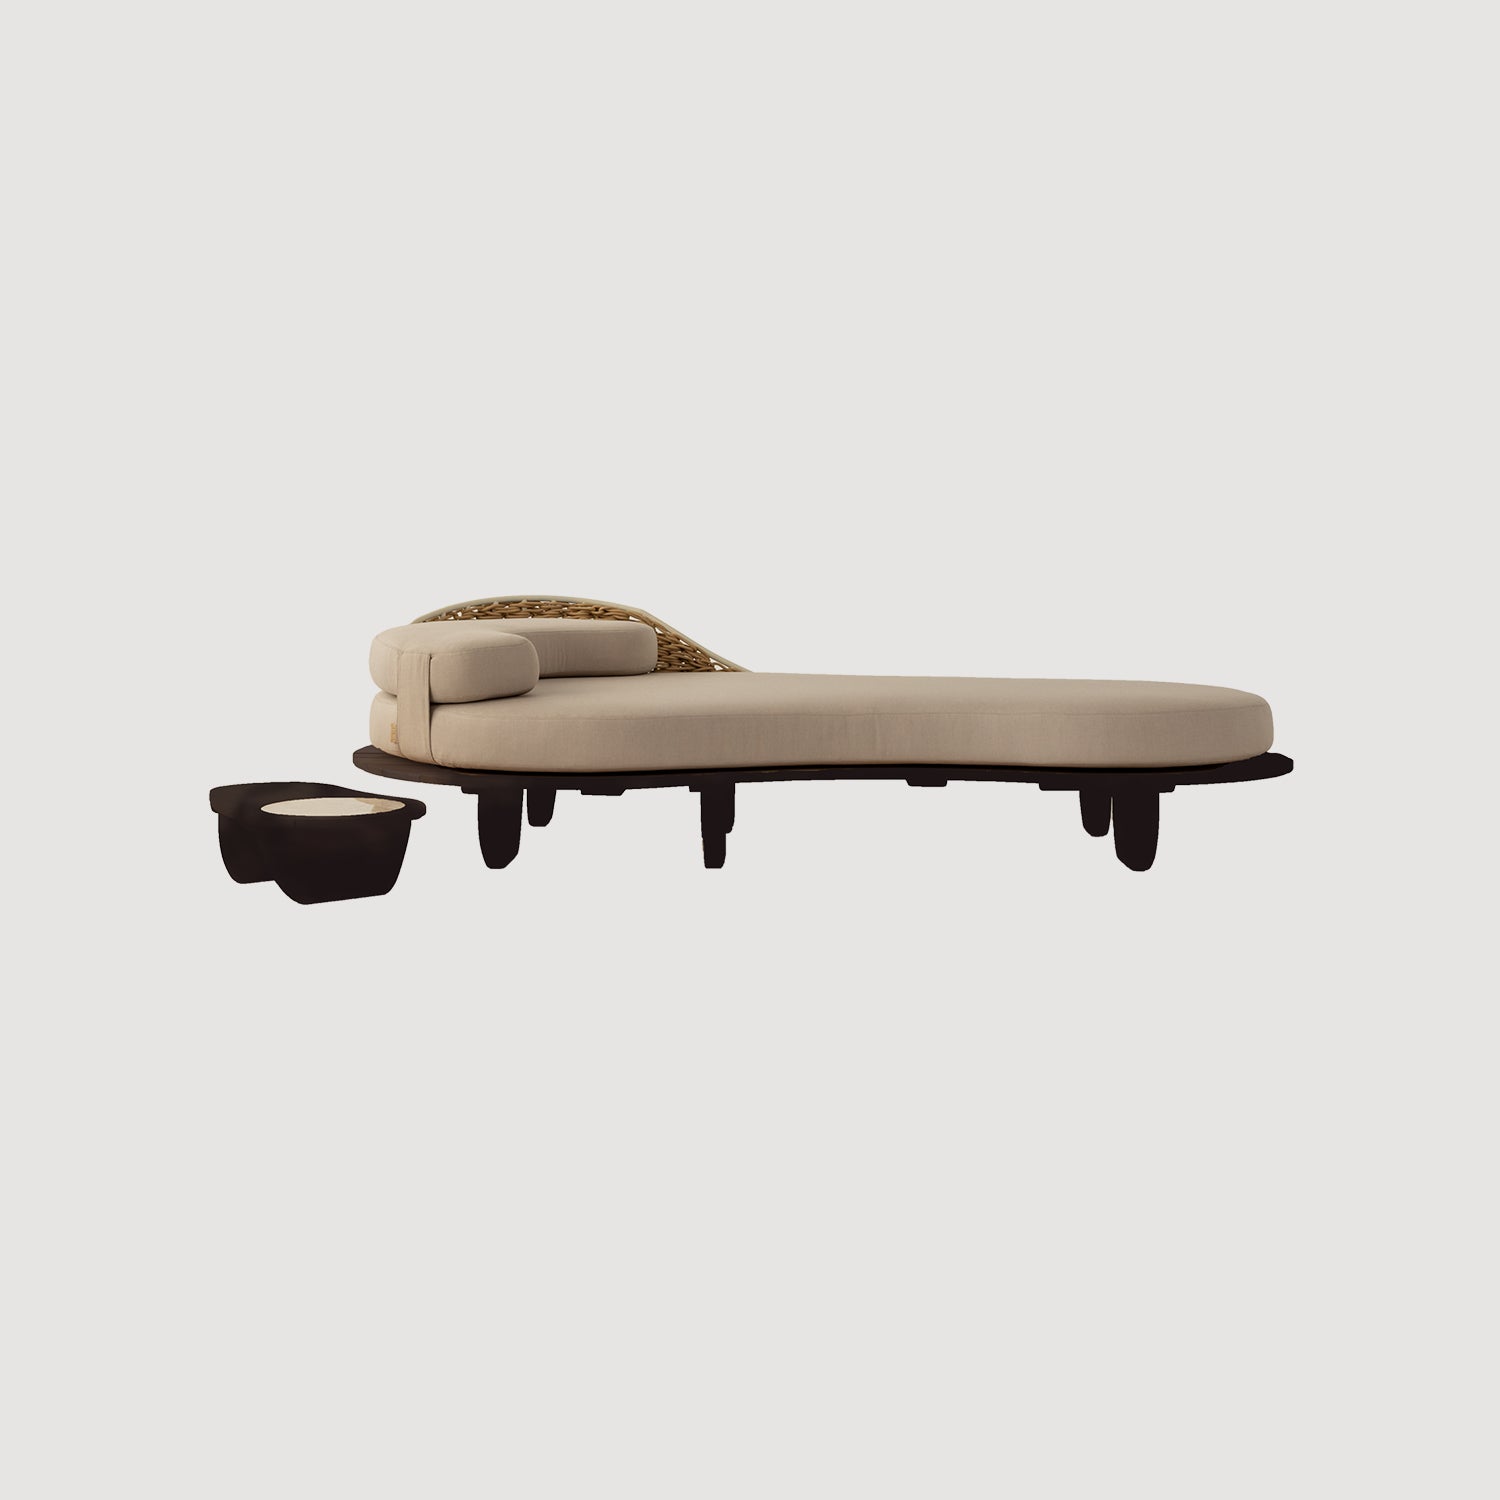 The Sayari Indoor / Outdoor Daybed Chaise and Table Kollektion von Studio Lloyd